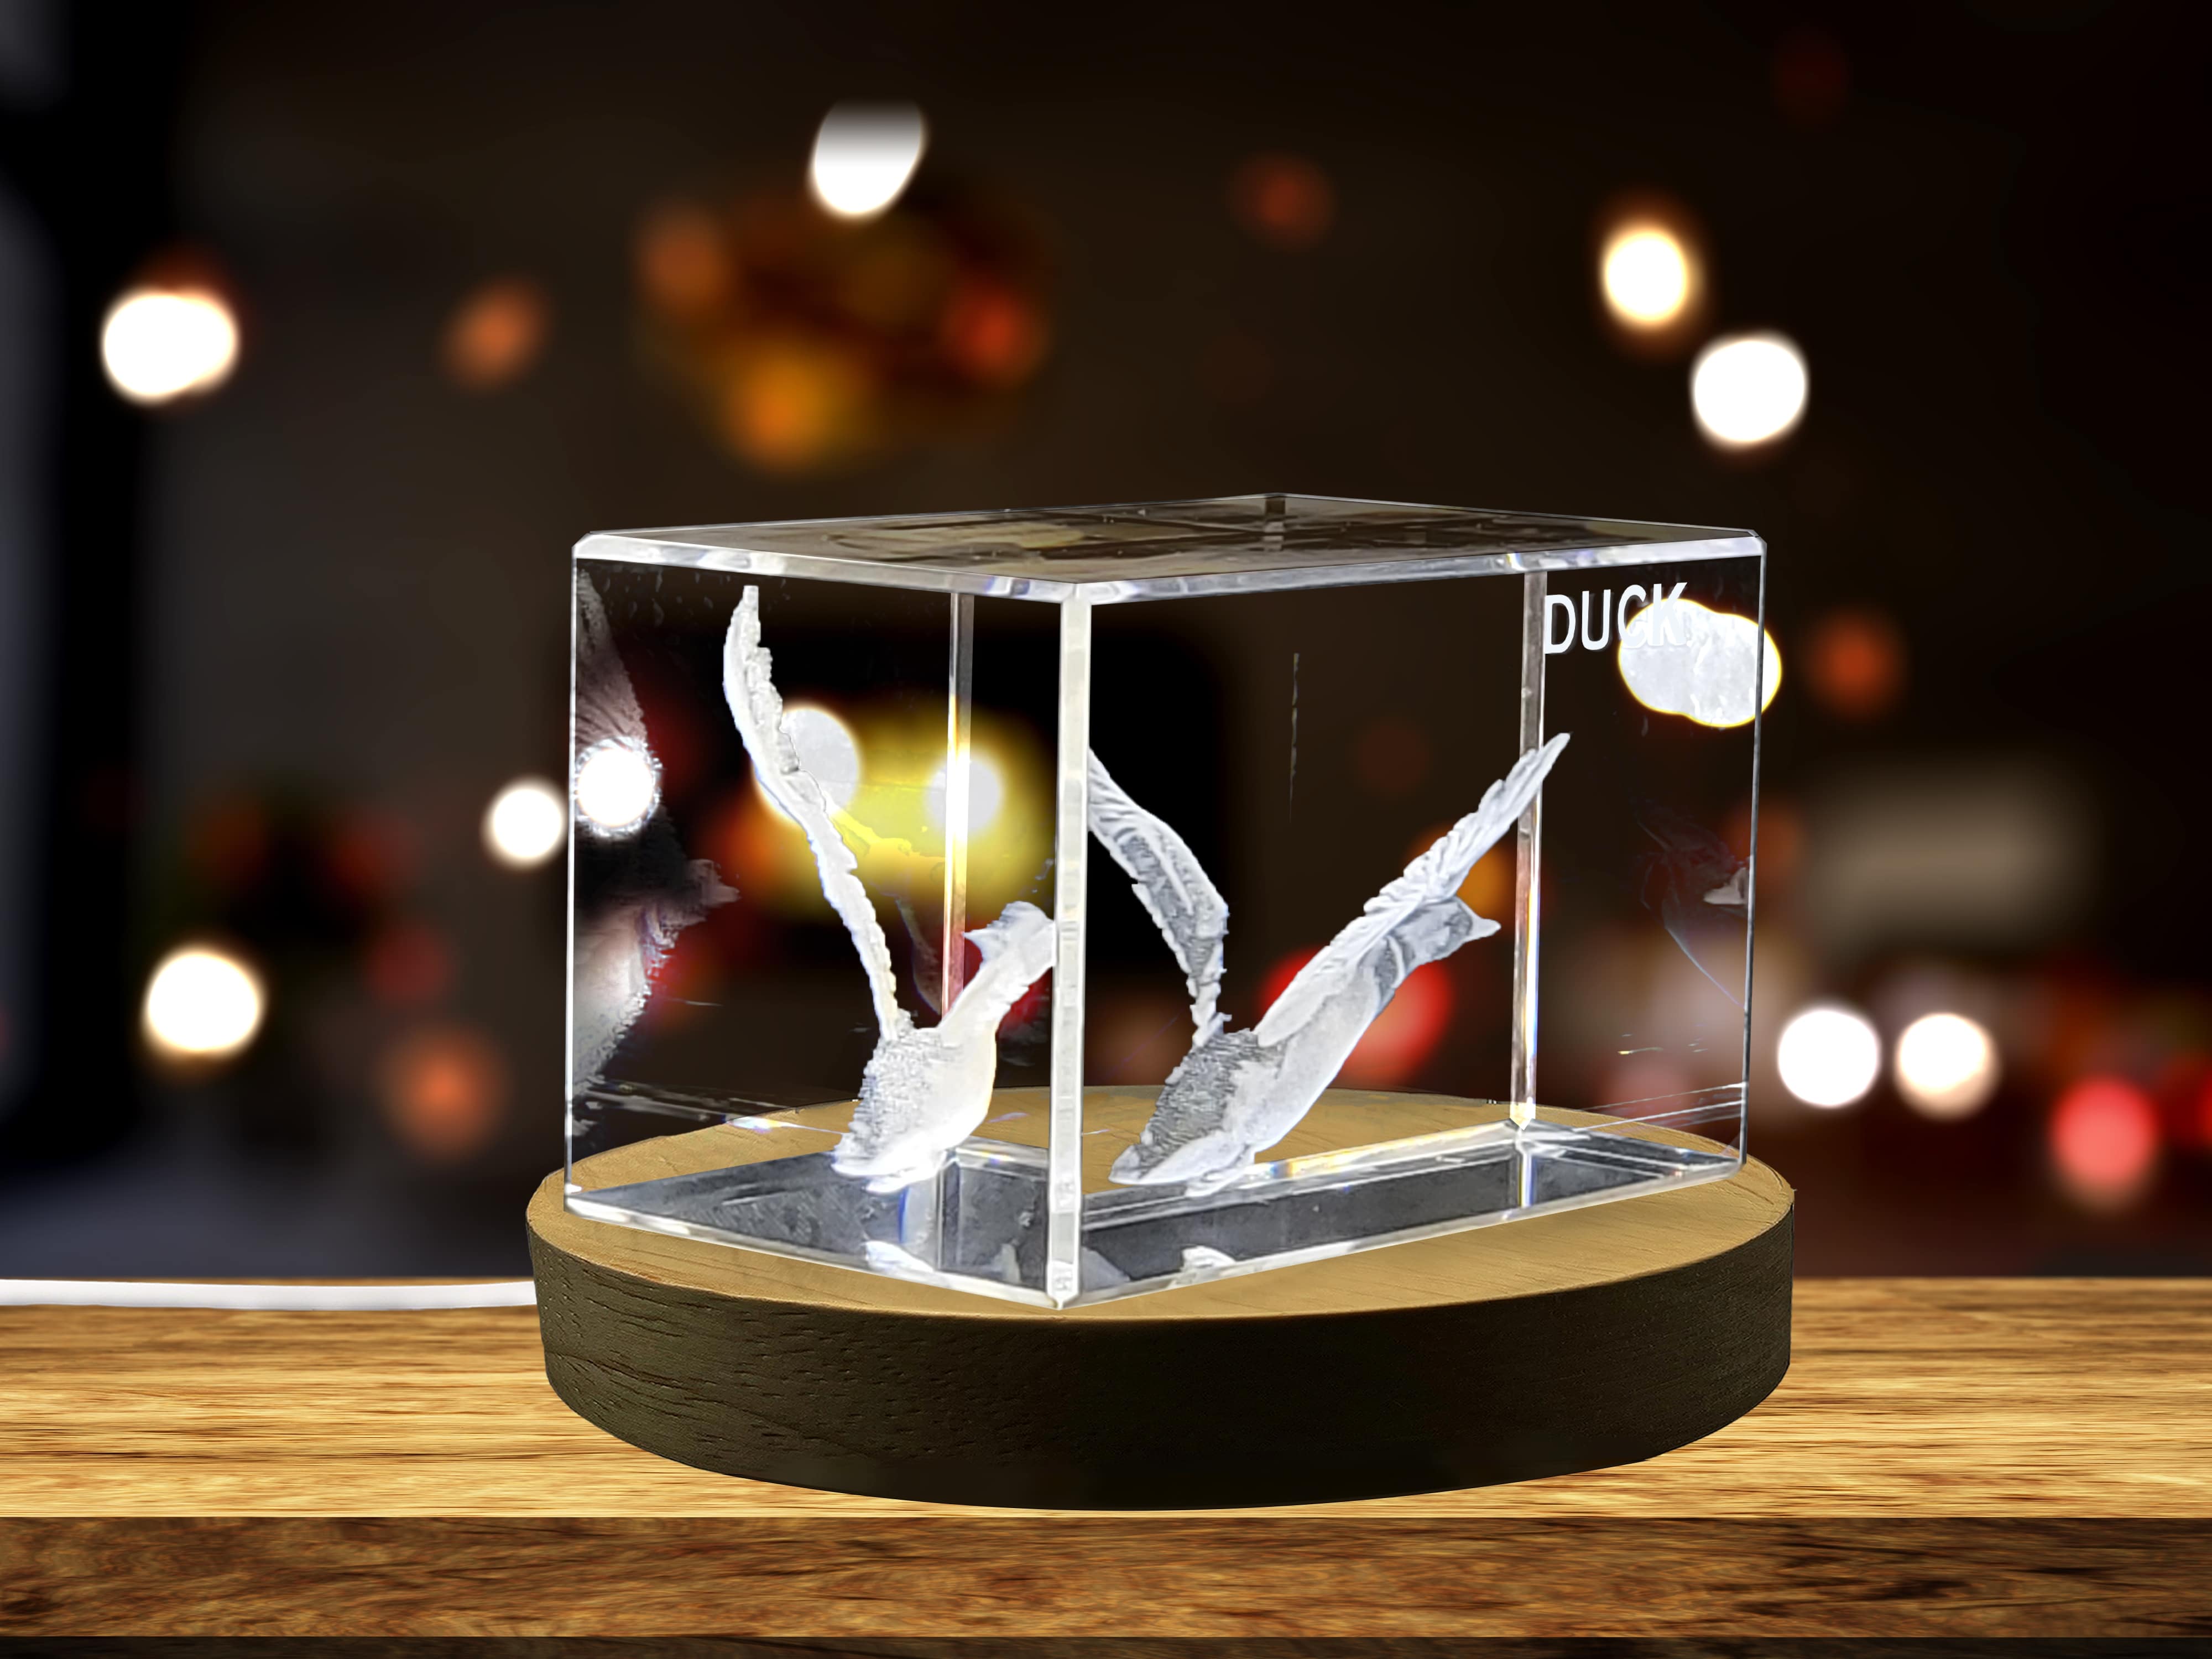 Beautiful 3D Engraved Crystal of a Majestic Duck - Perfect for Bird Lovers and Nature Enthusiasts A&B Crystal Collection